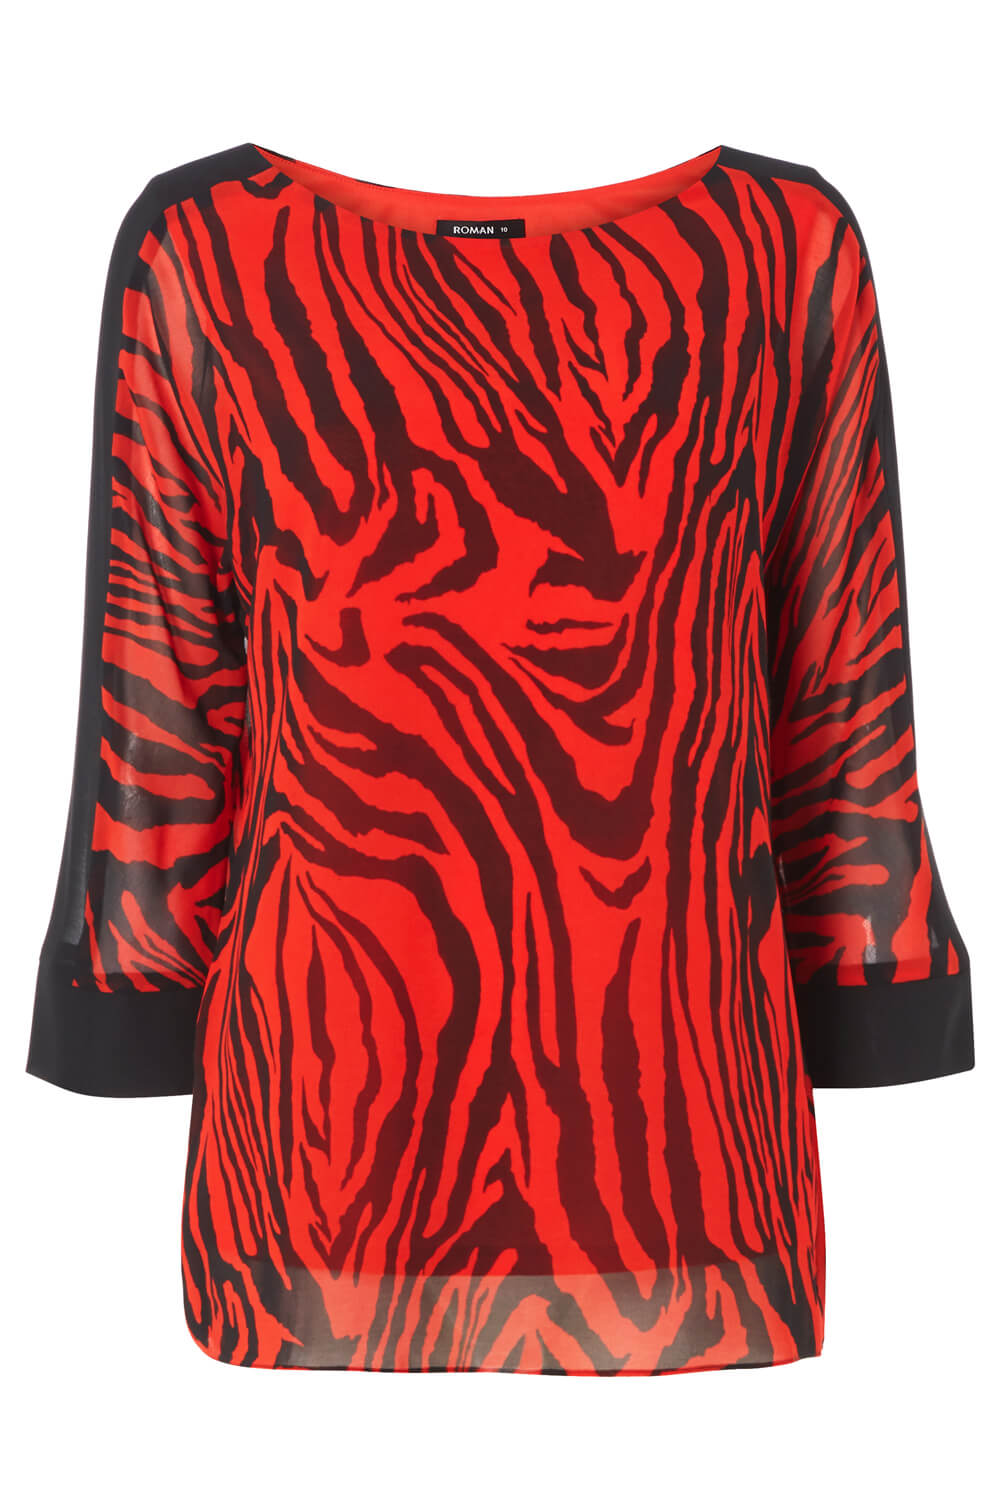 Red Animal Tiger Print 3/4 Sleeve Top, Image 5 of 5